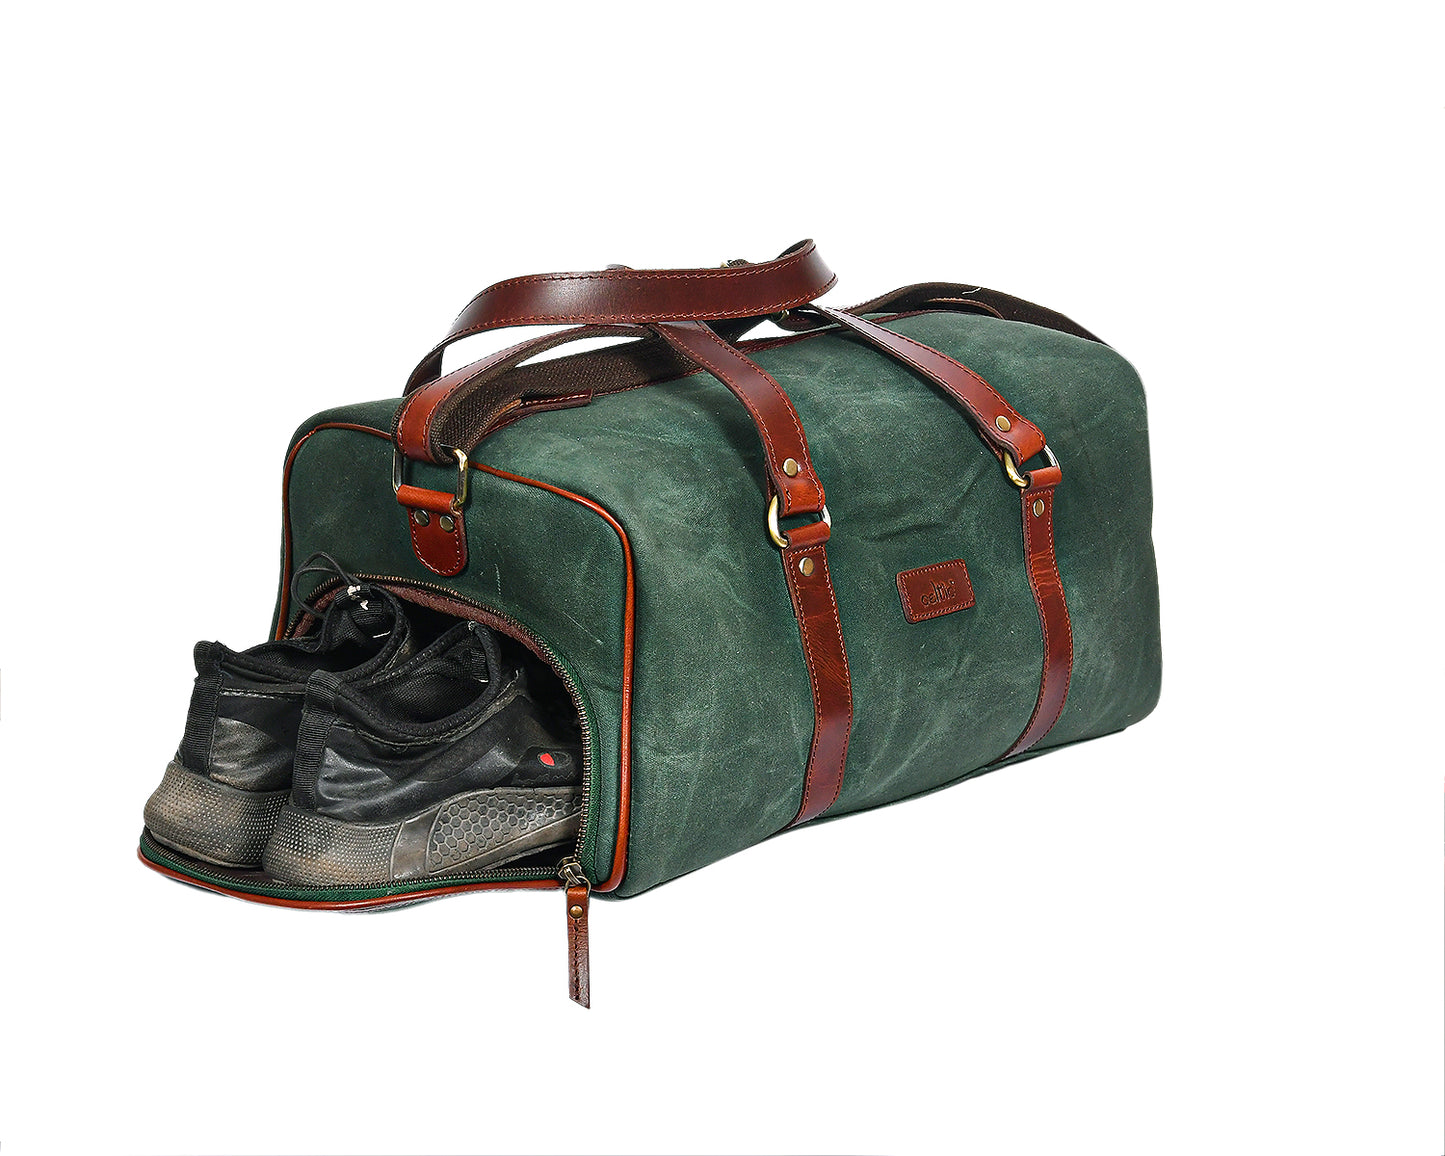 Stylish and Practical Small Gym Bag with Shoe Compartment - CELTICINDIA